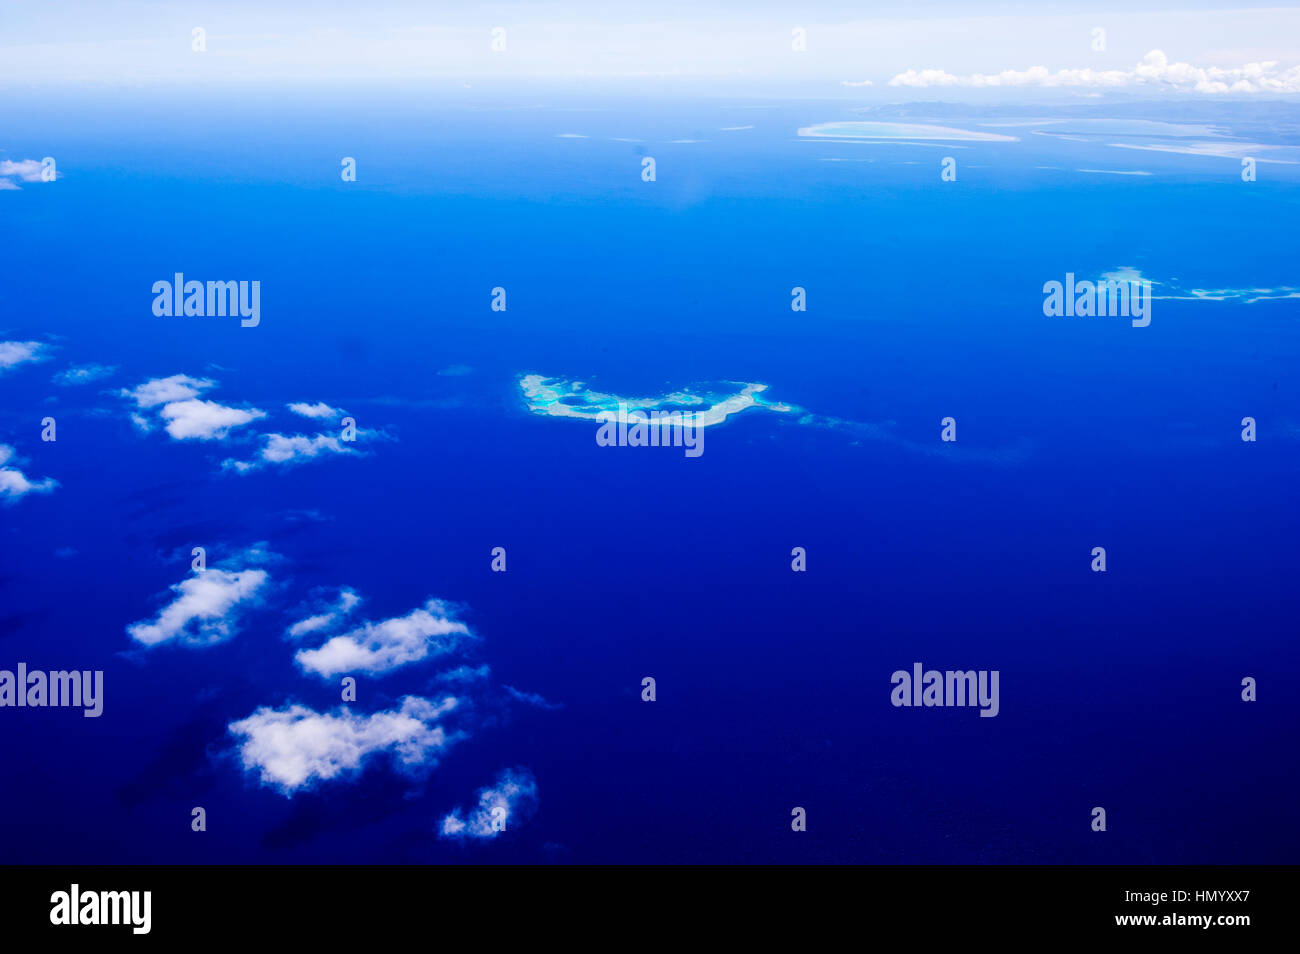 Clouds floating over a deep blue tropical ocean with isolated sandbars. Stock Photo